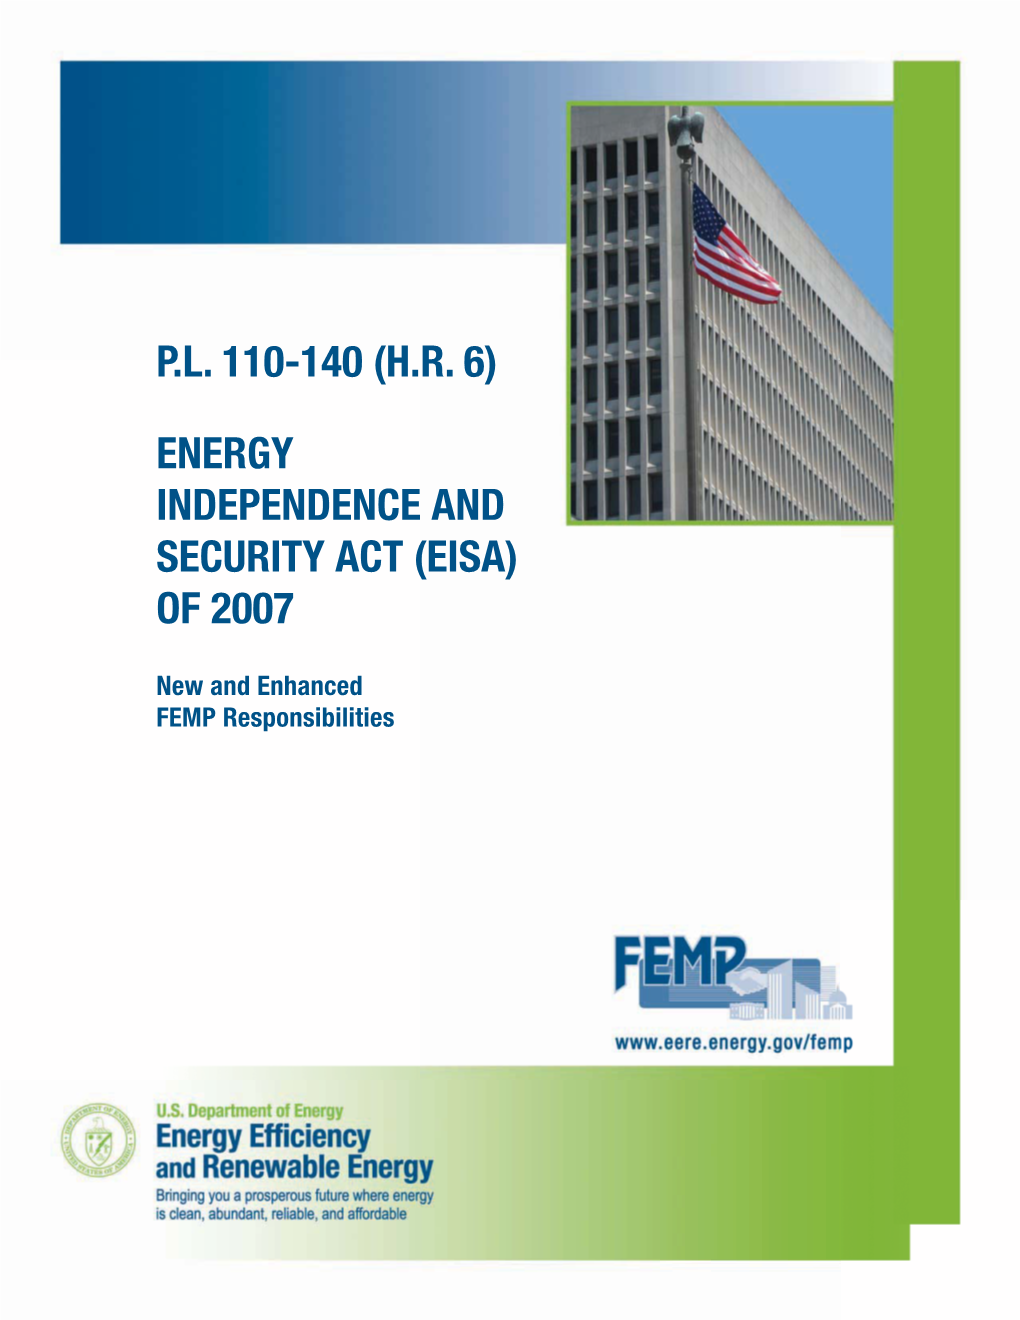 (Hr 6) Energy Independence and Security Act (Eisa) of 2007